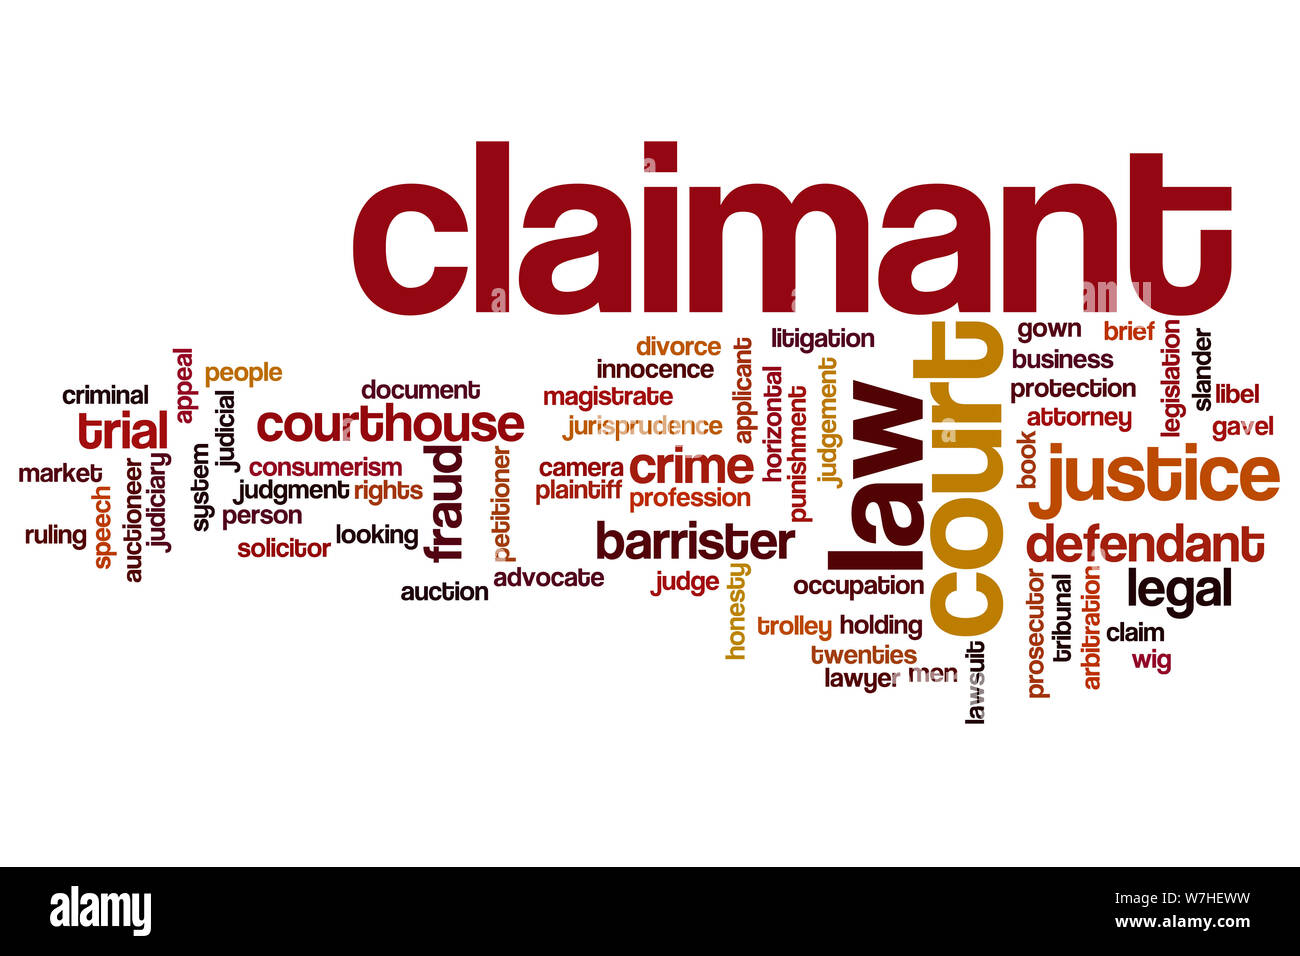 Claimant word cloud concept Stock Photo